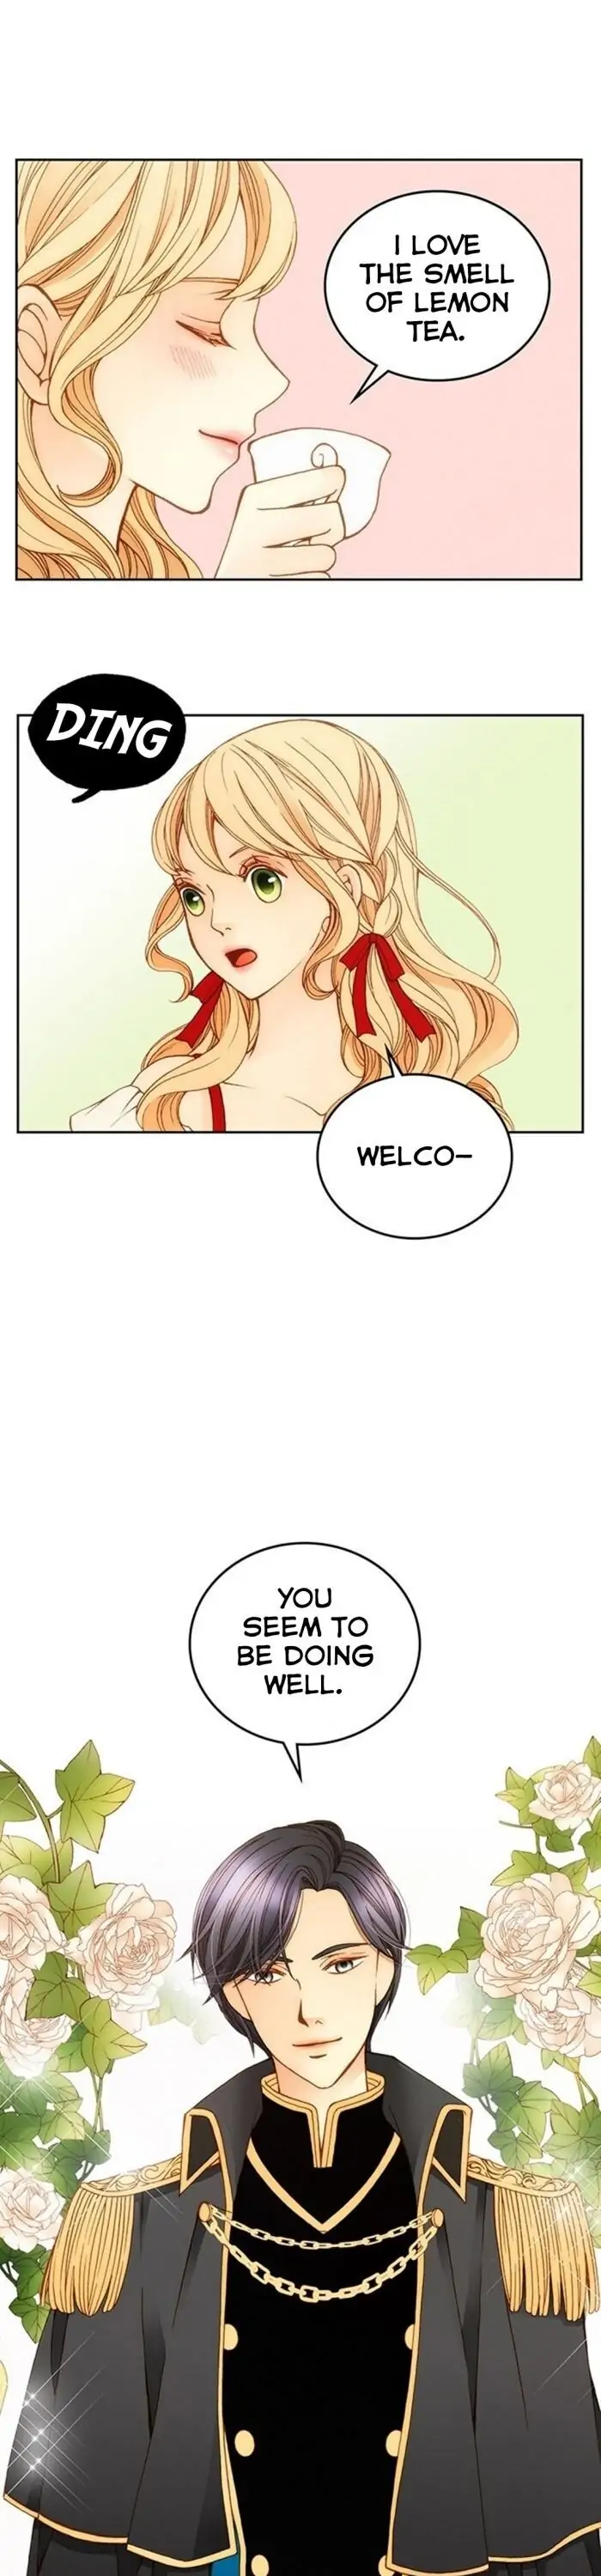 Wendy The Florist chapter 6